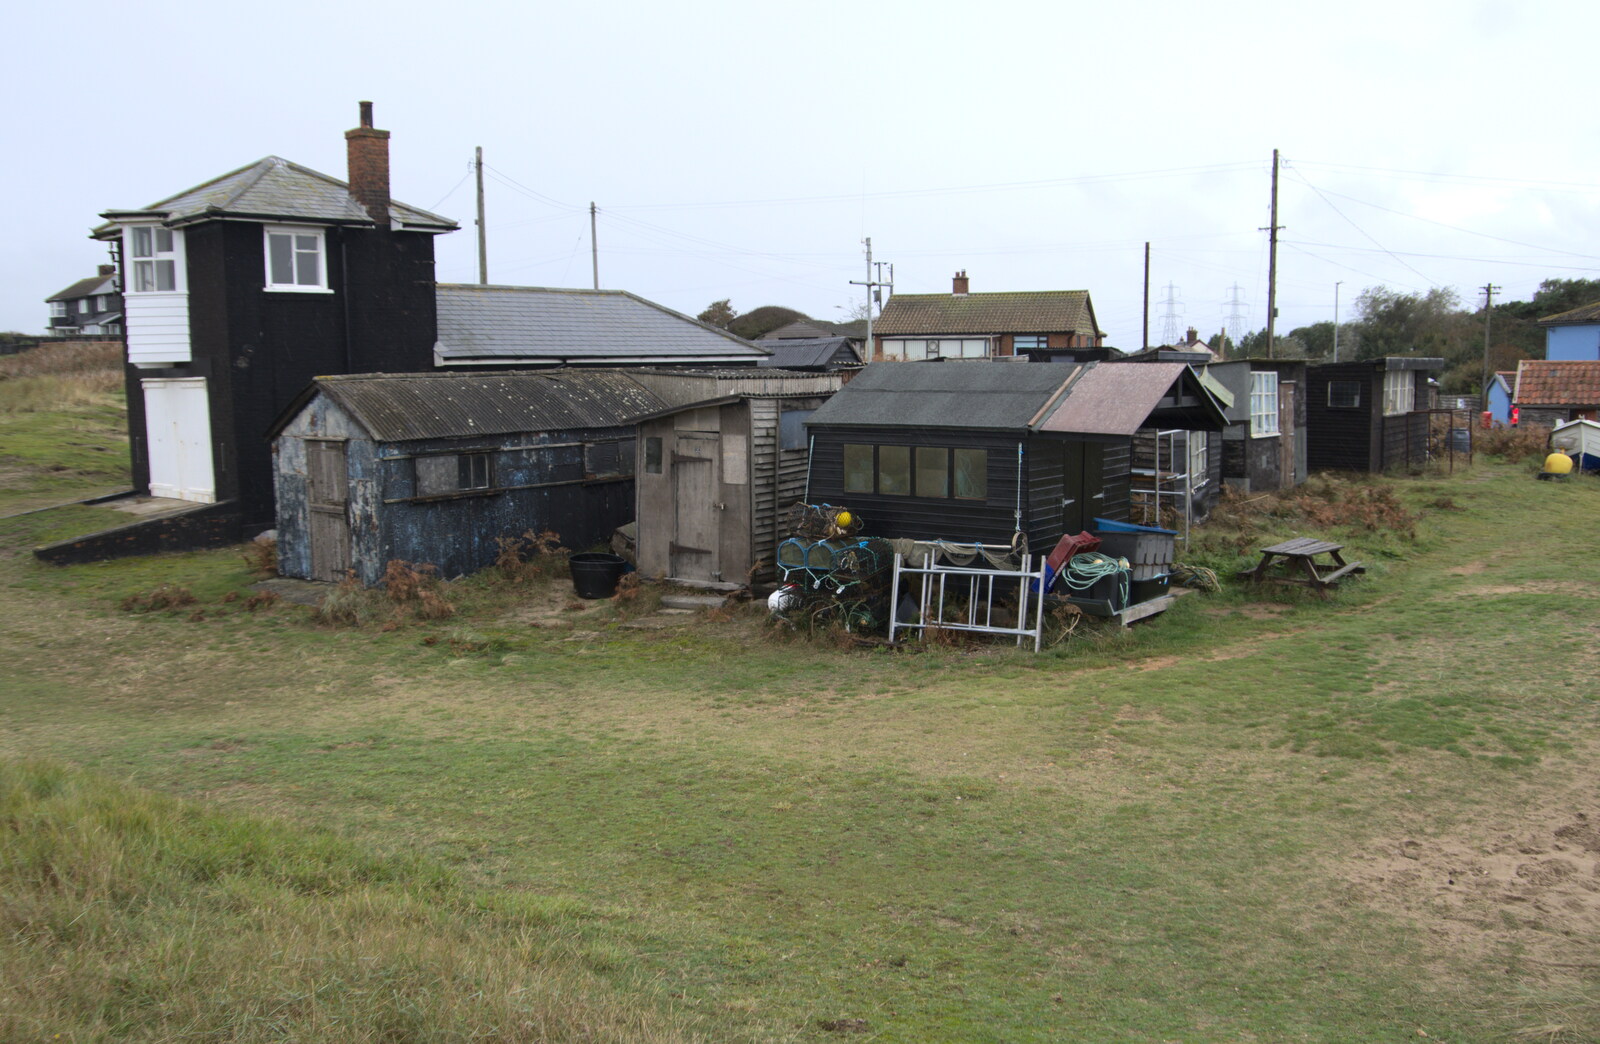 A ramshackle collection of huts from Sizewell Beach and the Lion Pub, Sizewell and Theberton, Suffolk - 4th October 2020